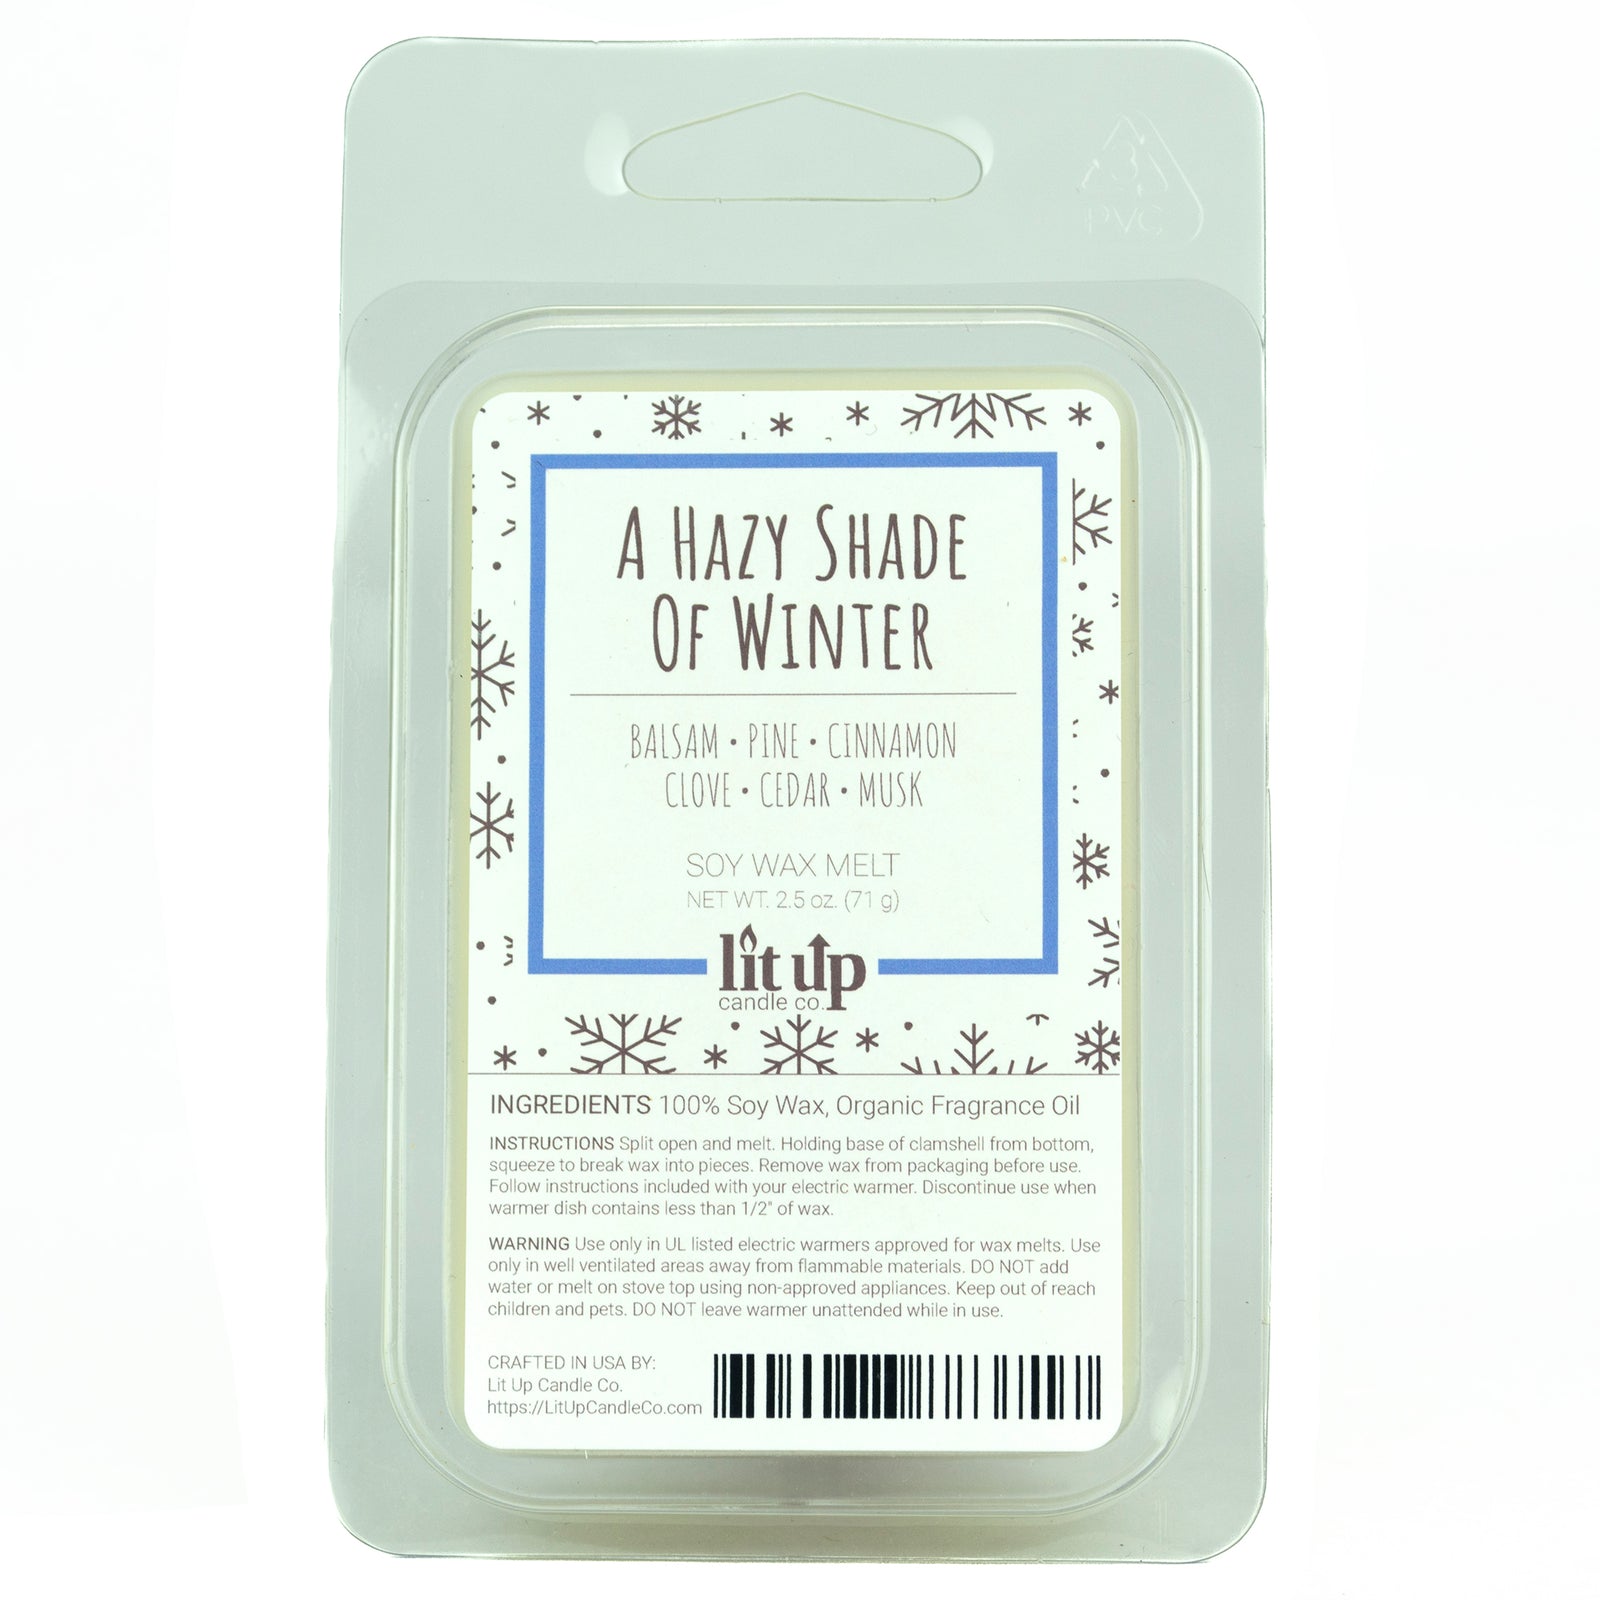 American Pie scented 2.5 oz. soy wax melt